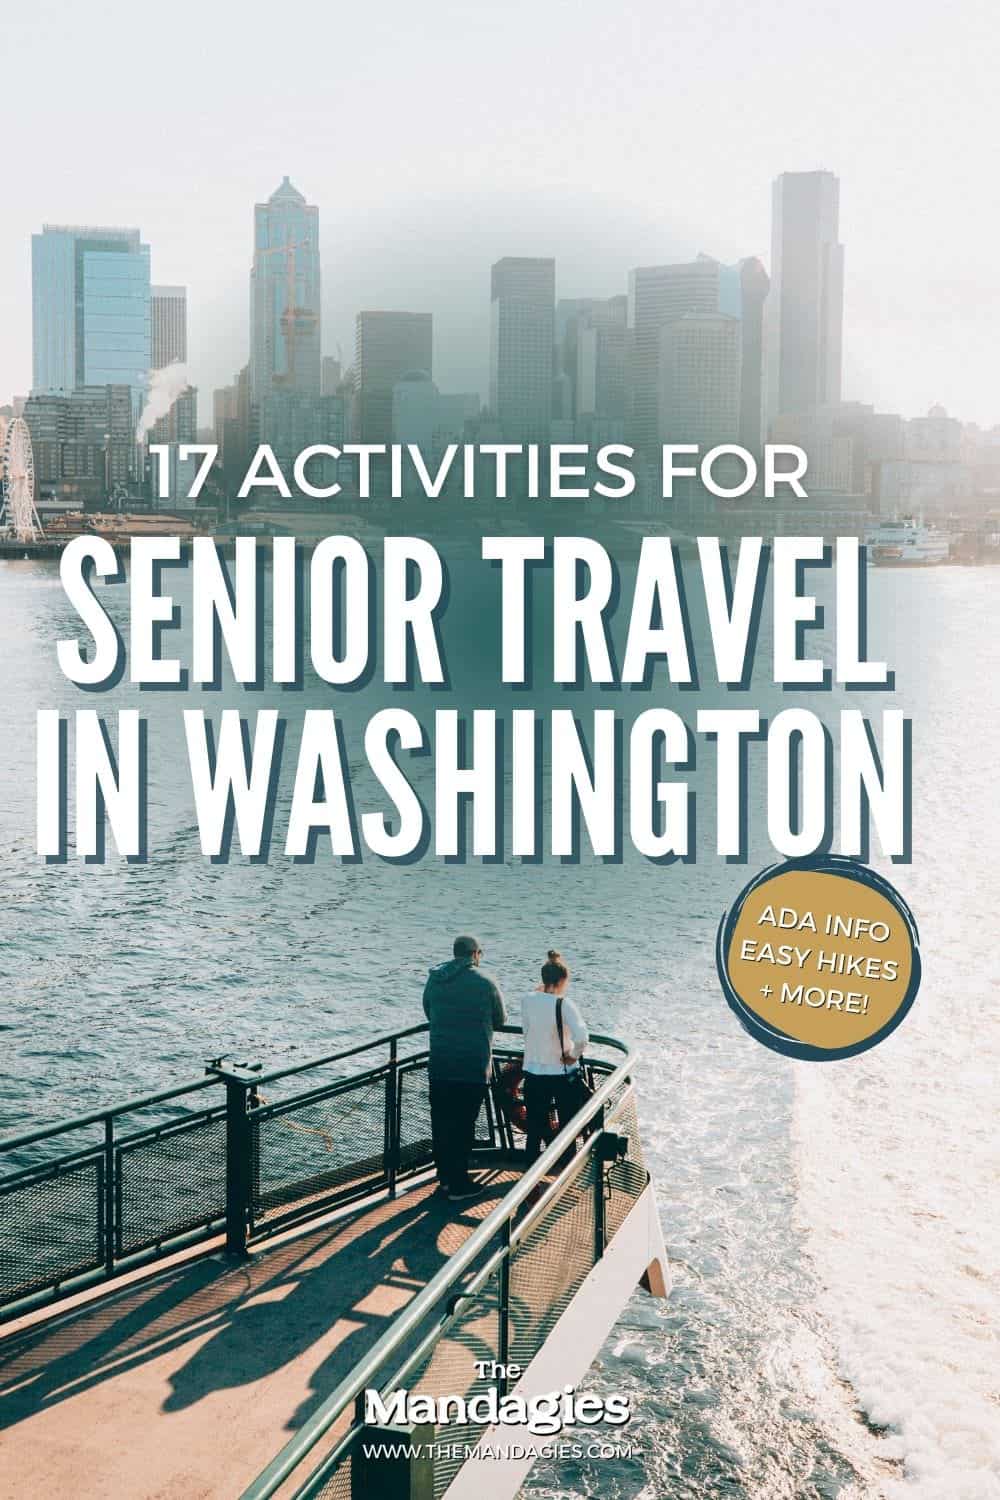 Are you traveling to the Pacific Northwest with older friends of family? We’re sharing the best activities for seniors in Washington state!